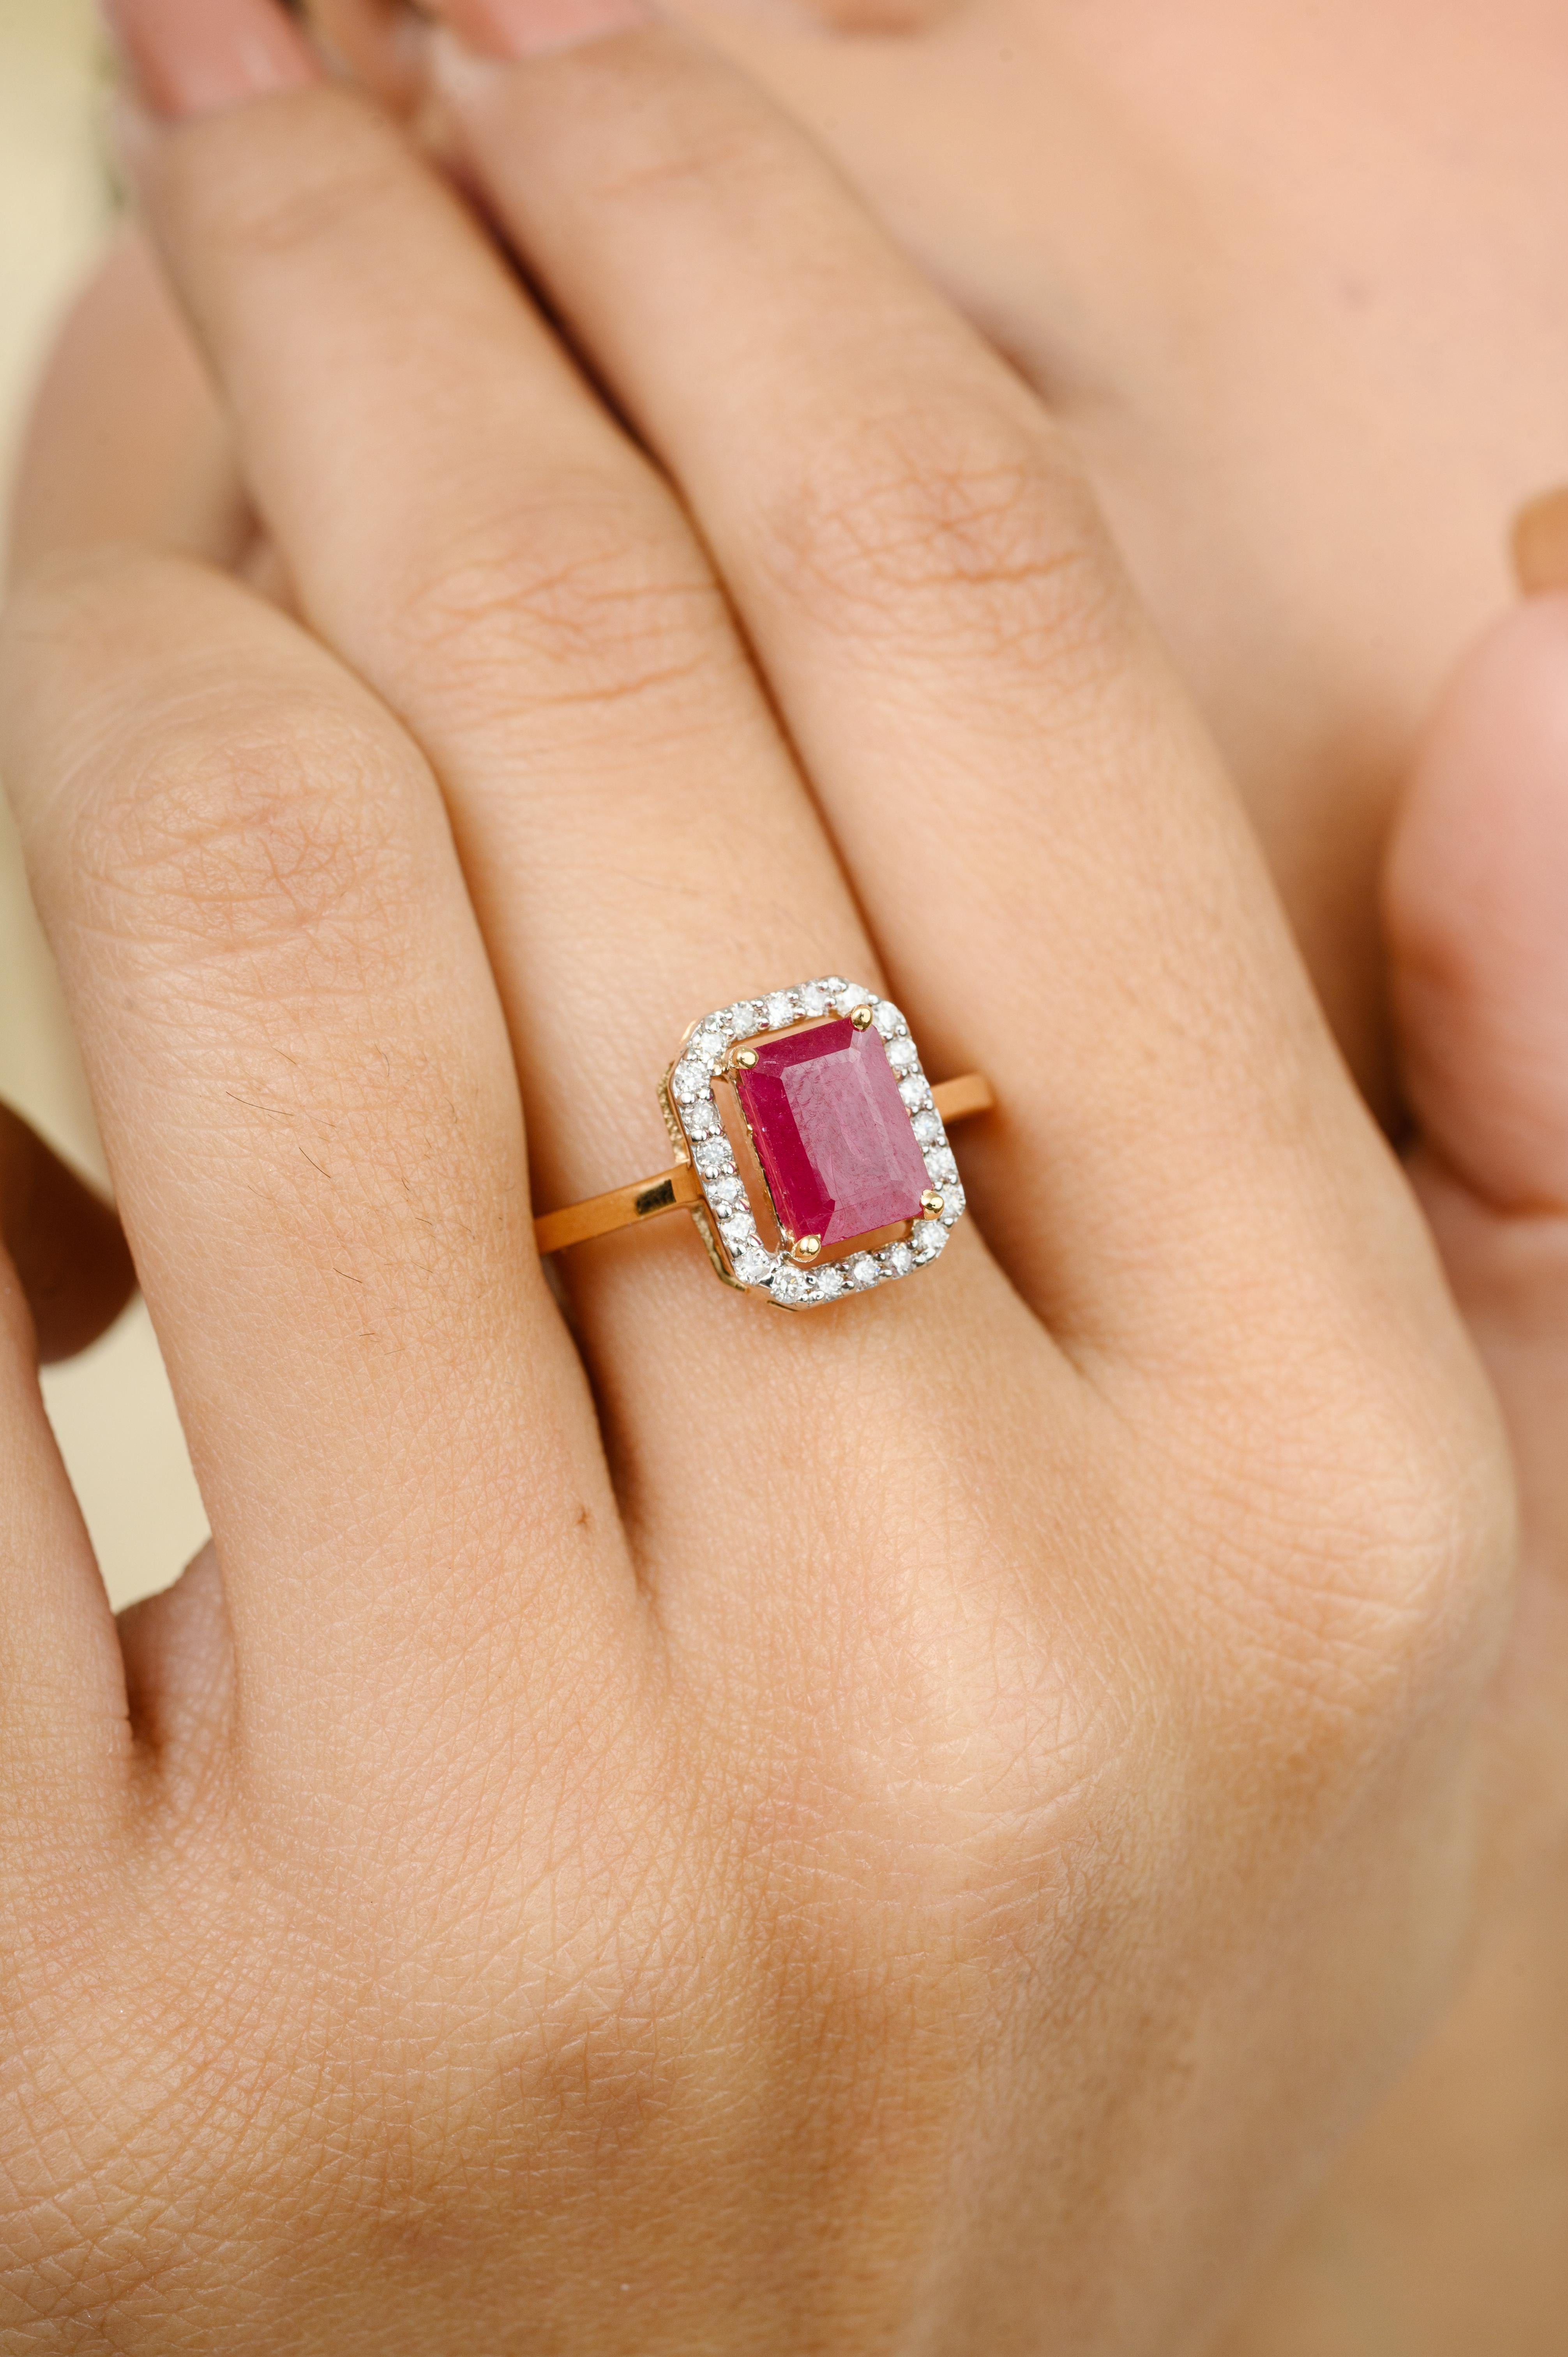 For Sale:  2.95 Carat Authentic Ruby Diamond Halo Engagement Ring in 18k Solid Yellow Gold 2